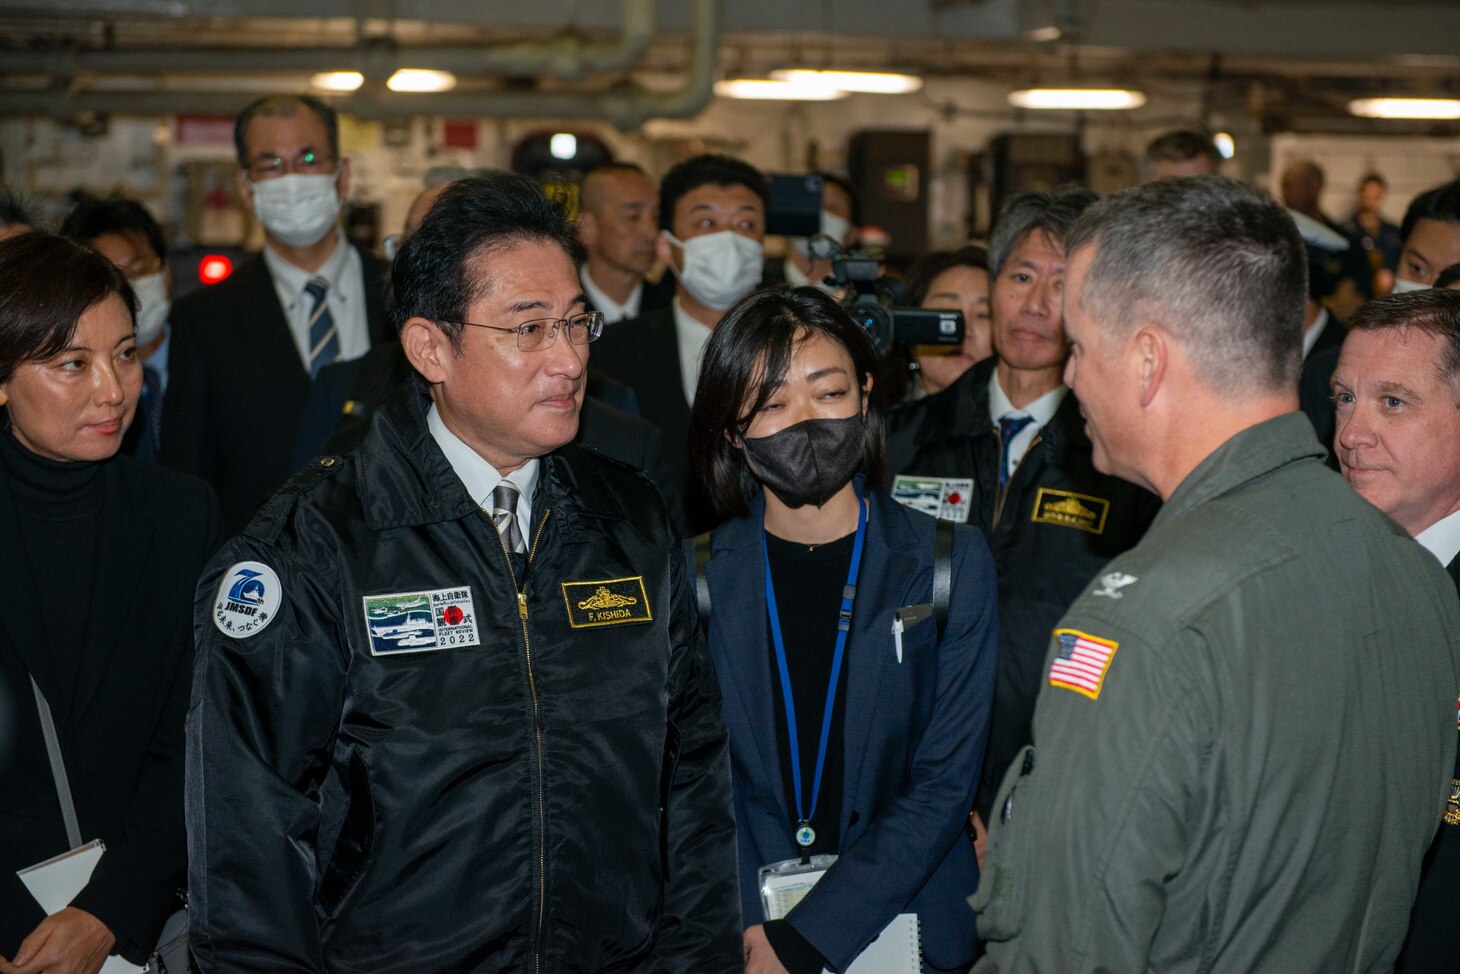 SAGAMI WAN (Nov. 6, 2022) Japan Prime Minister Fumio Kishida tours the hangar, led by Capt. Michael Sweeny, commander, Carrier Air Wing 5, aboard the U.S. Navy’s only forward-deployed aircraft carrier, USS Ronald Reagan (CVN 76), during the Japan Maritime Self-Defense Force Fleet Review 2022, in the Sagami Wan, Nov. 6. Ronald Reagan, the flagship of Carrier Strike Group 5, provides a combat-ready force that protects and defends the United States, and supports alliances, partnerships and collective maritime interests in the Indo-Pacific region. (U.S. Navy photo by Mass Communication Specialist 2nd Class Michael B. Jarmiolowski)